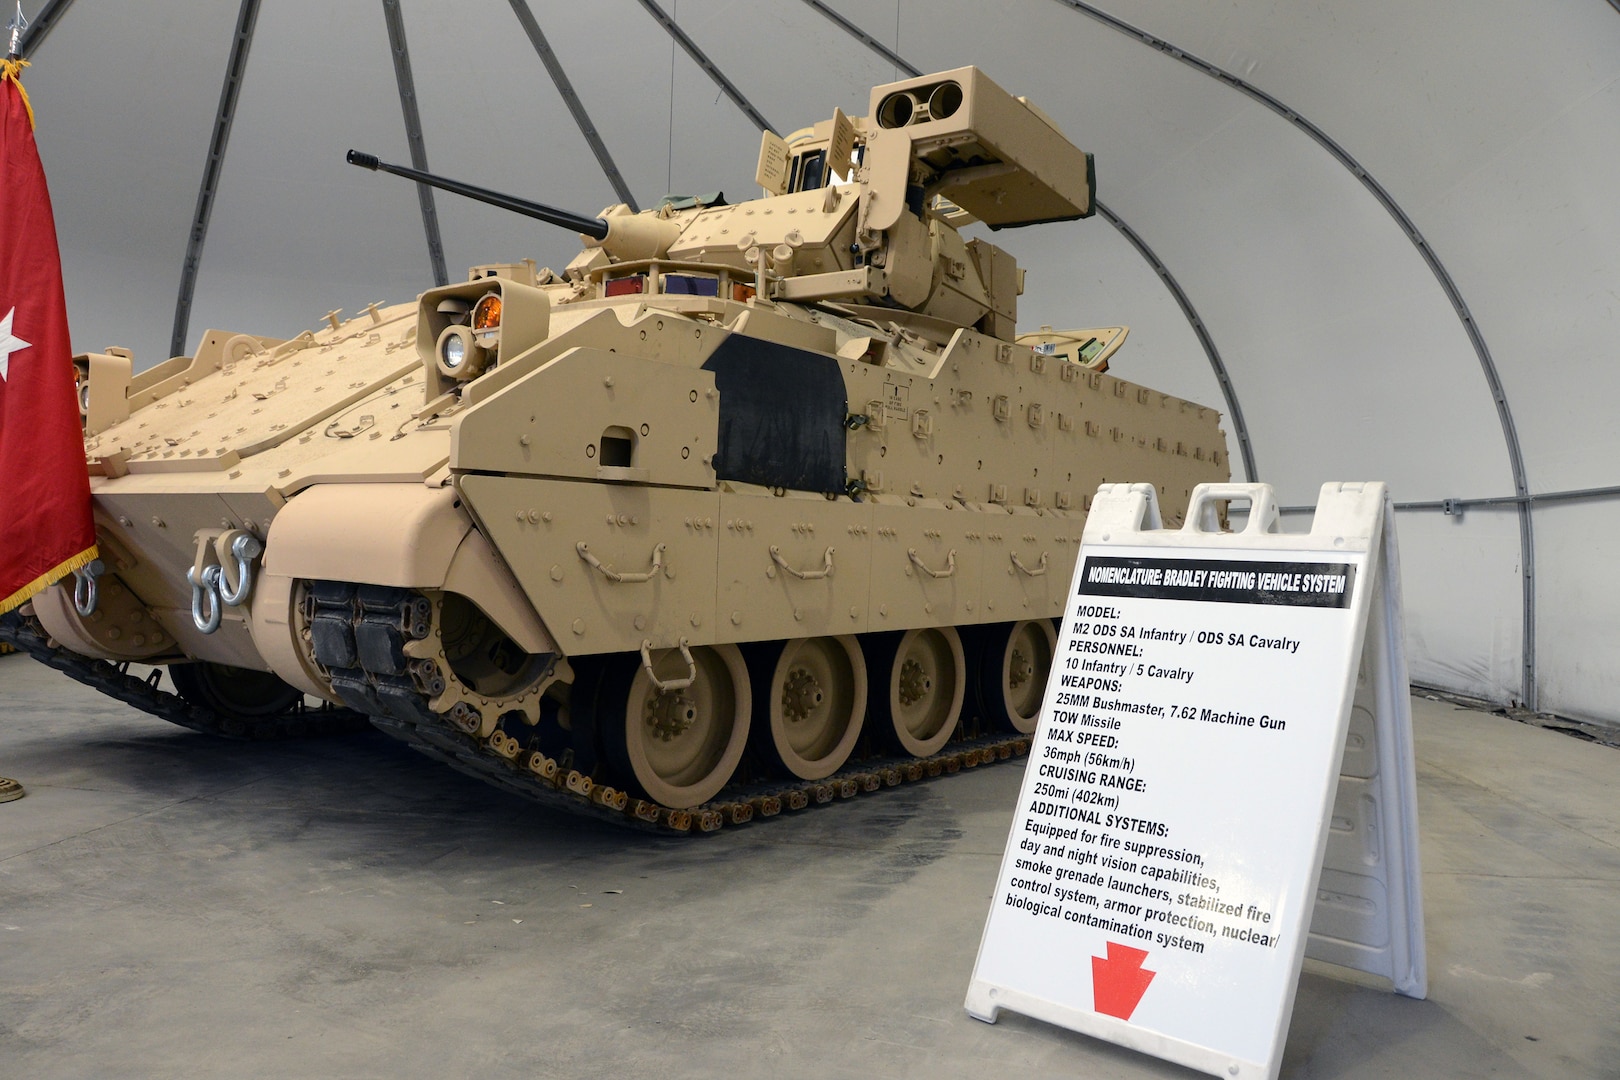 An M2A2 ODS-SA Bradley Fighting Vehicle, the latest addition to the Pennsylvania Army National Guard’s armored vehicle fleet, sits on display during an unveiling ceremony for the vehicle at Fort Indiantown Gap, Pa. The upgraded Bradley Fighting Vehicle features embedded training and diagnostic systems, programmable displays, a thermal view for the driver, inertial navigation and upgraded armor protection. Additionally, the new vehicles offer greater combat capabilities, are safer to operate and easier to maintain than former variants, said officials.